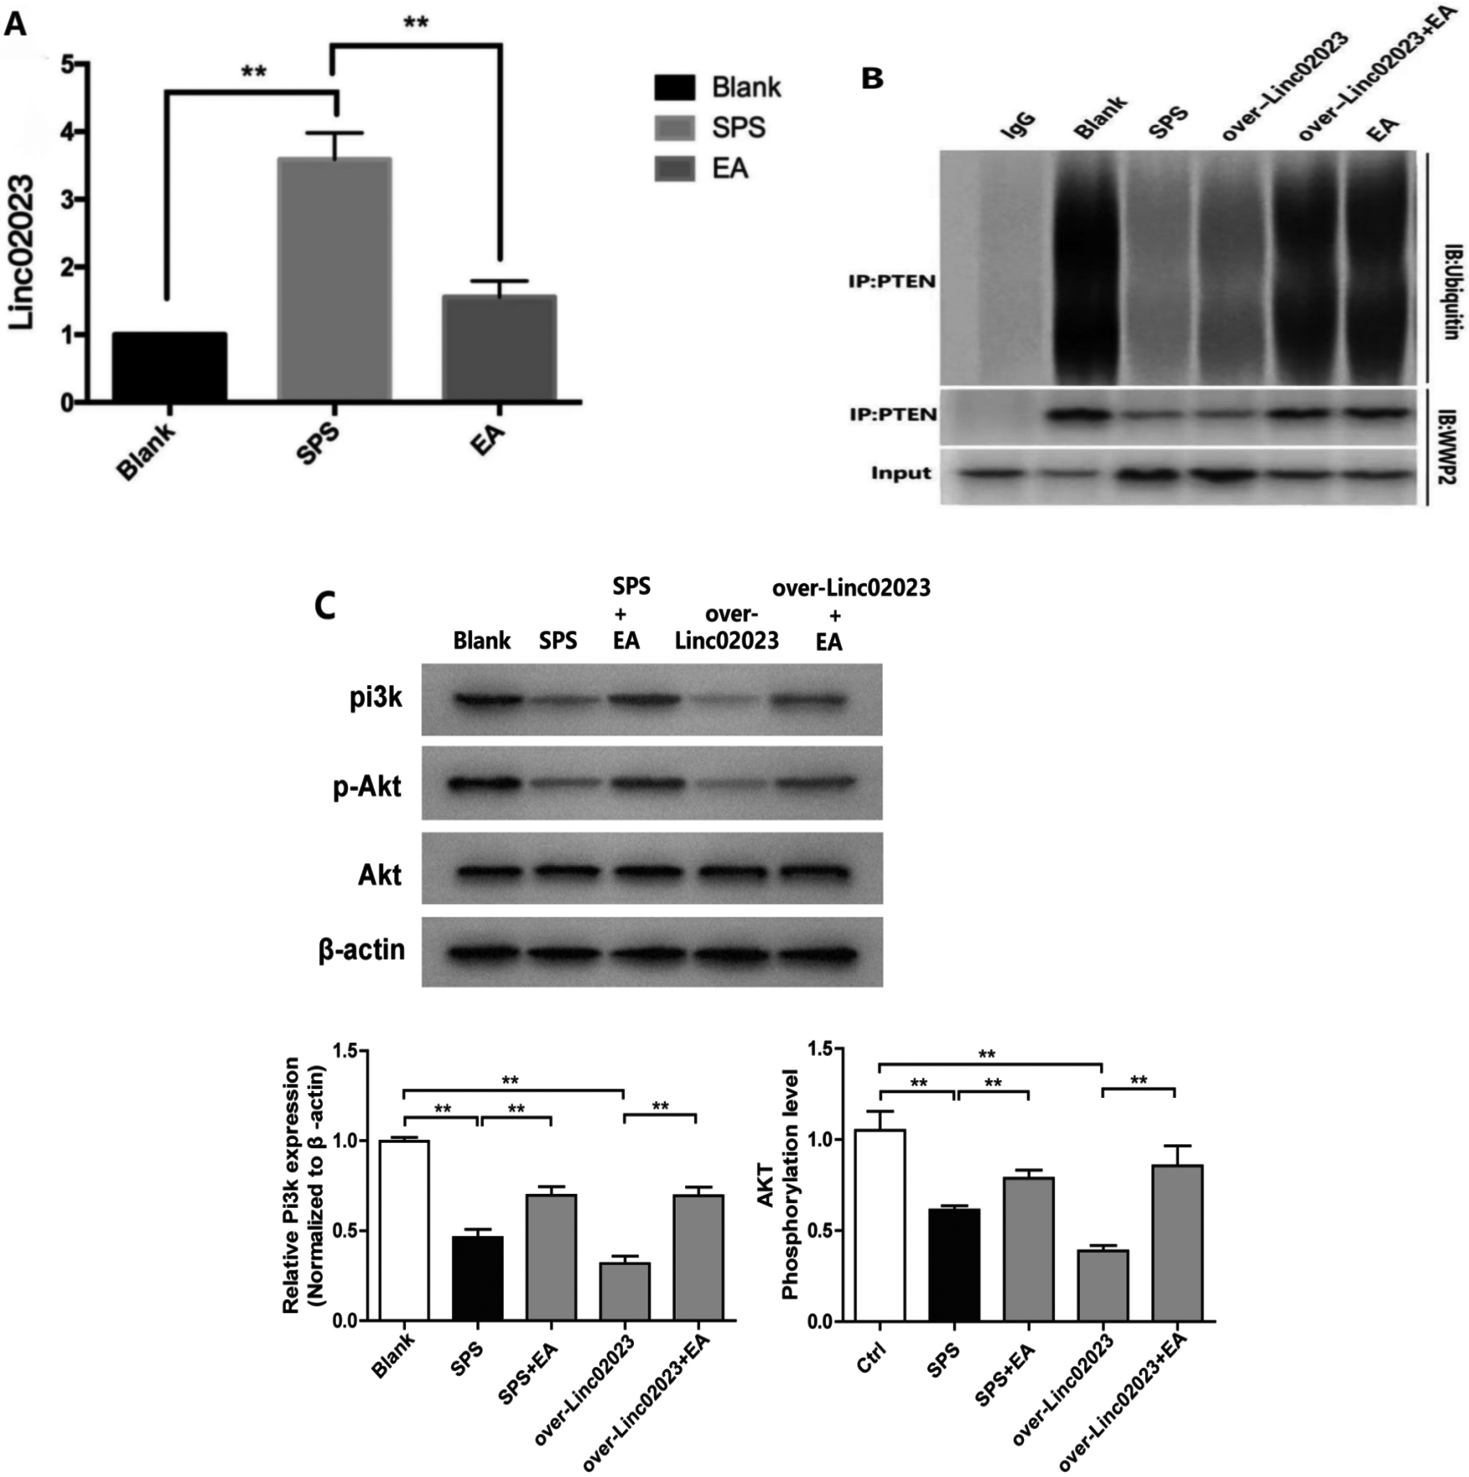 Activation of PI3K is achieved by inhibiting the expression of lincRNA 02023, which increases the binding affinity of PTEN for WWP2. (A) The relative expression of lincRNA 02023 in the hippocampus of rats in the control, SPS and SPS+EA groups was measured by RT-PCR (n= 3, p**< 0.01, compared with the SPS group). (B) Hippocampal tissue lysates were immunoprecipitated with anti-PTEN antibody or control immunoglobulin G (IgG), followed by a coimmunoprecipitation assay to detect the interaction between PTEN and WWP2 as well as the level of PTEN ubiquitination (n= 3). (C) Western blot data were quantified and normalized to the β-actin level for p-AKT/AKT and total PI3K levels (n= 3, p*< 0.05, p**< 0.01, compared with the SPS group).